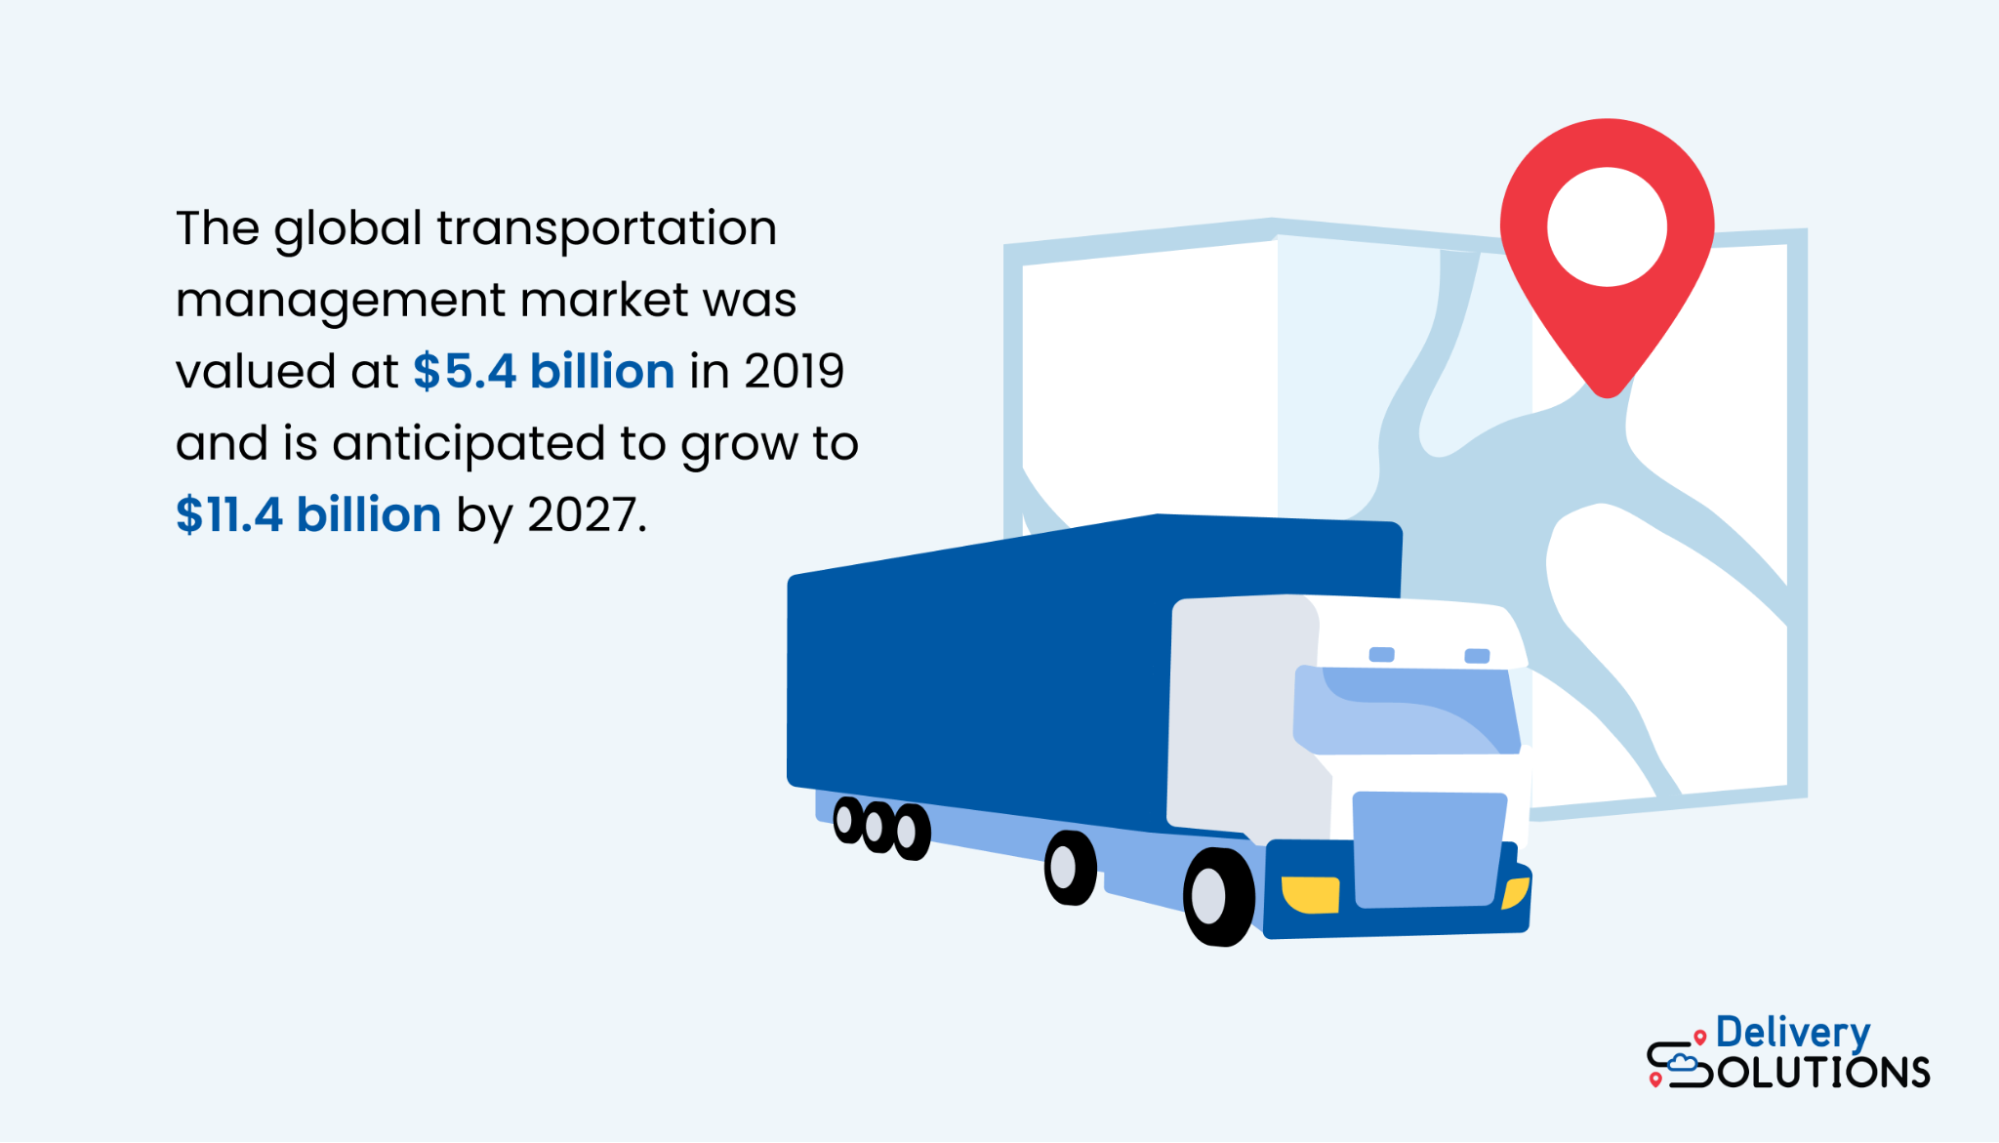 The growth of the transportation management industry